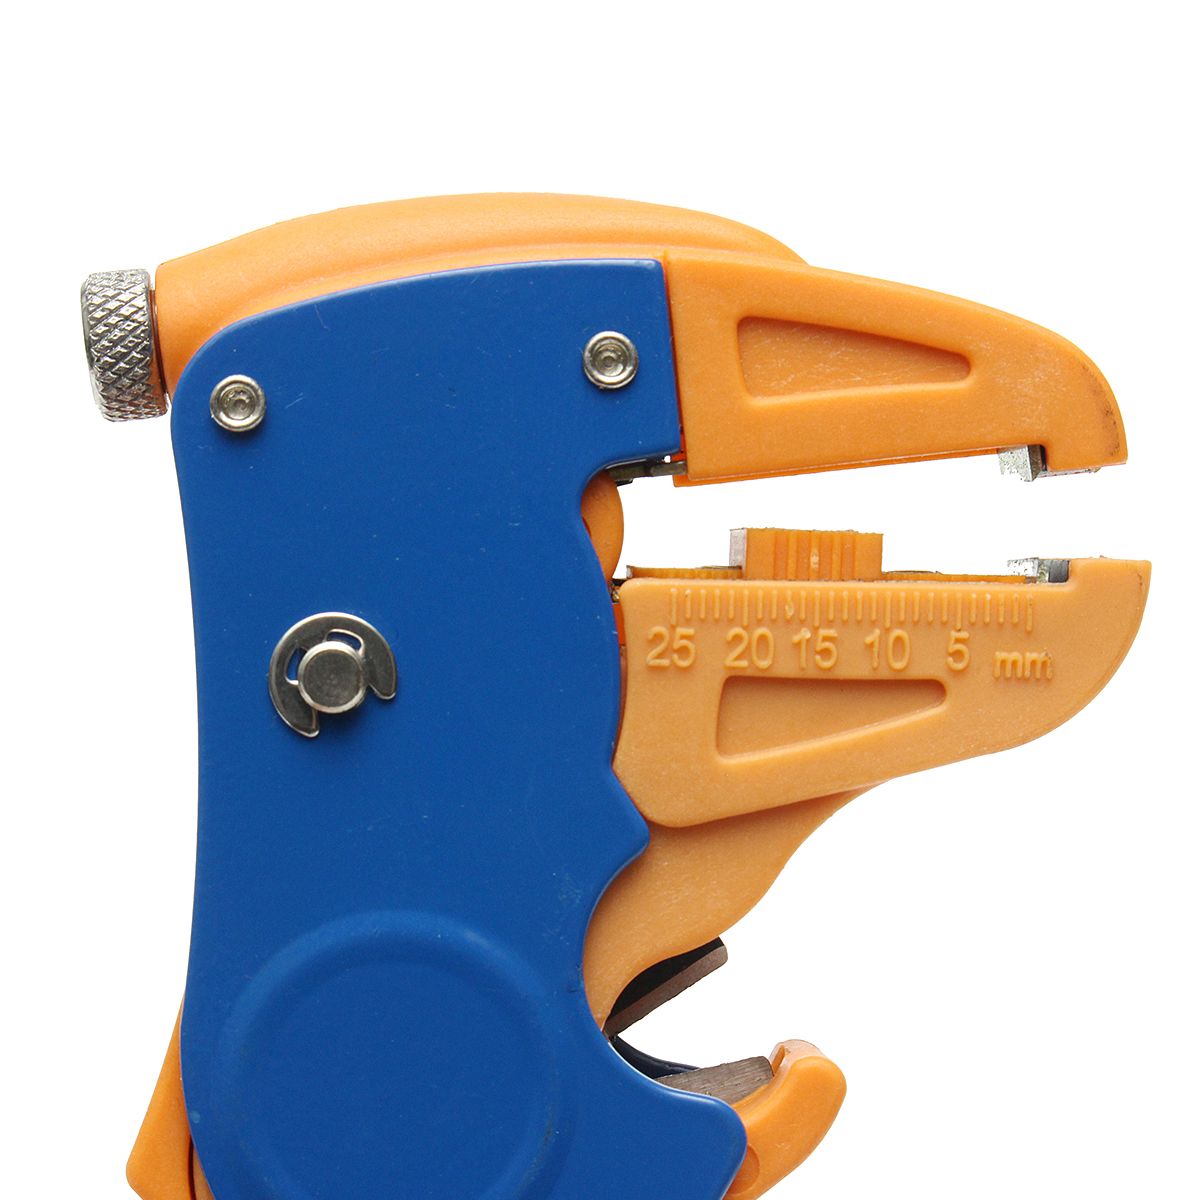 HS-700D-2-in-1-0256mmsup2-Automatic-Cable-Wire-Stripper-Cutter-Pliers-Crimper-Crimping-Tool-1132287